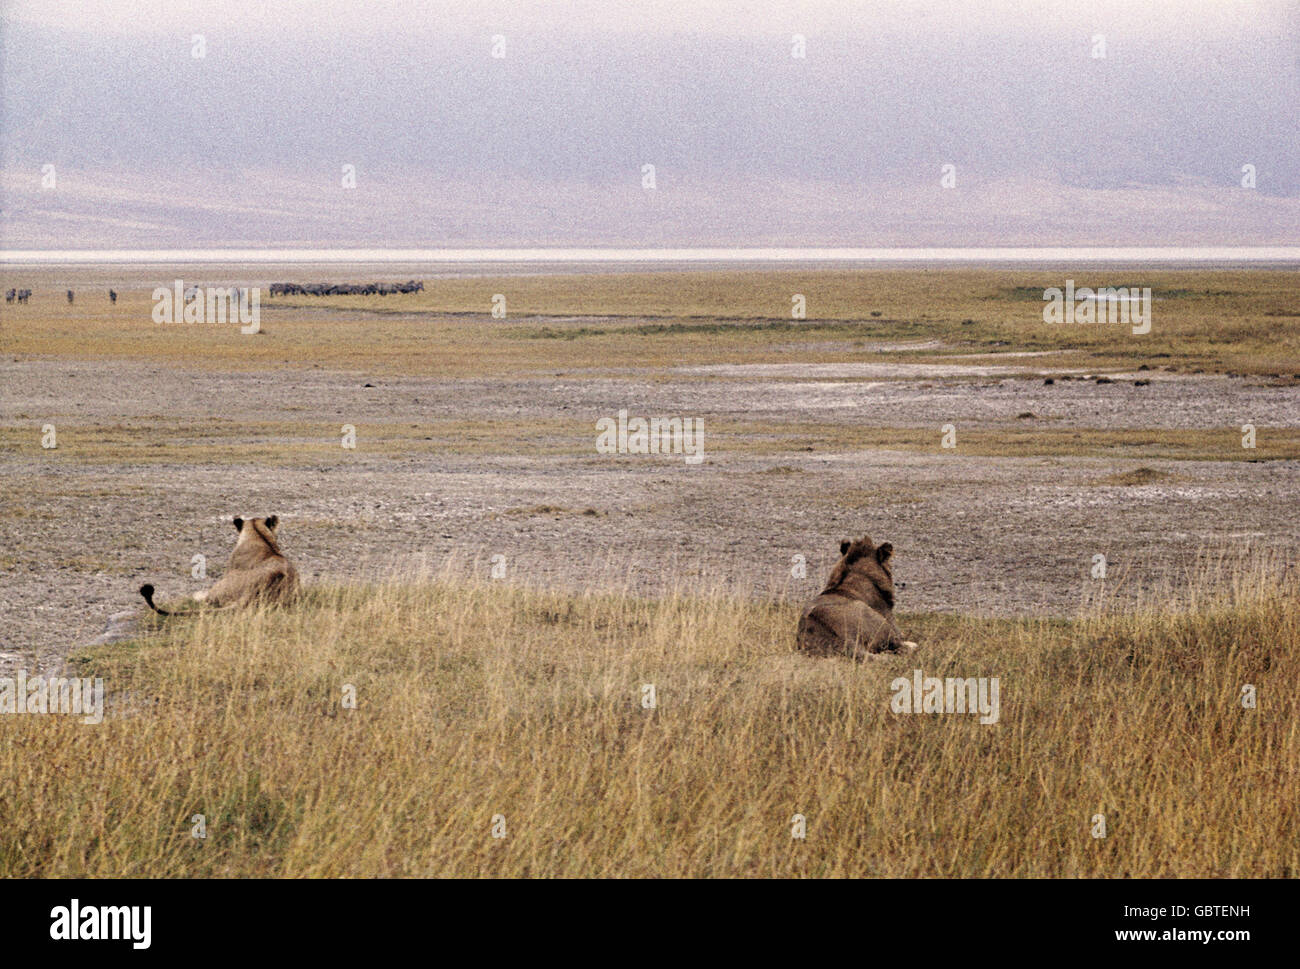 geography / travel, Tanzania, Serengeti, Ngorongoro, lions in grassland, 1960s, 60s, 20th century, historic, historical, Africa, zoology, animal, animals, mammal, mammalian, mammals, mammalians, mammalia, predator, beast of prey, carnivore, predators, beasts of prey, carnivores, national park, UNESCO World Natural Heritage Site / Sites, lowlands, champaign, flat country, flat land, flat ground, flat, plain, level country, steppe, savanna, grass-covered plain, pampa, scrub, veld, Ilanos, steppes, grass-covered plains, landscape, landscapes, wideness, Additional-Rights-Clearences-Not Available Stock Photo